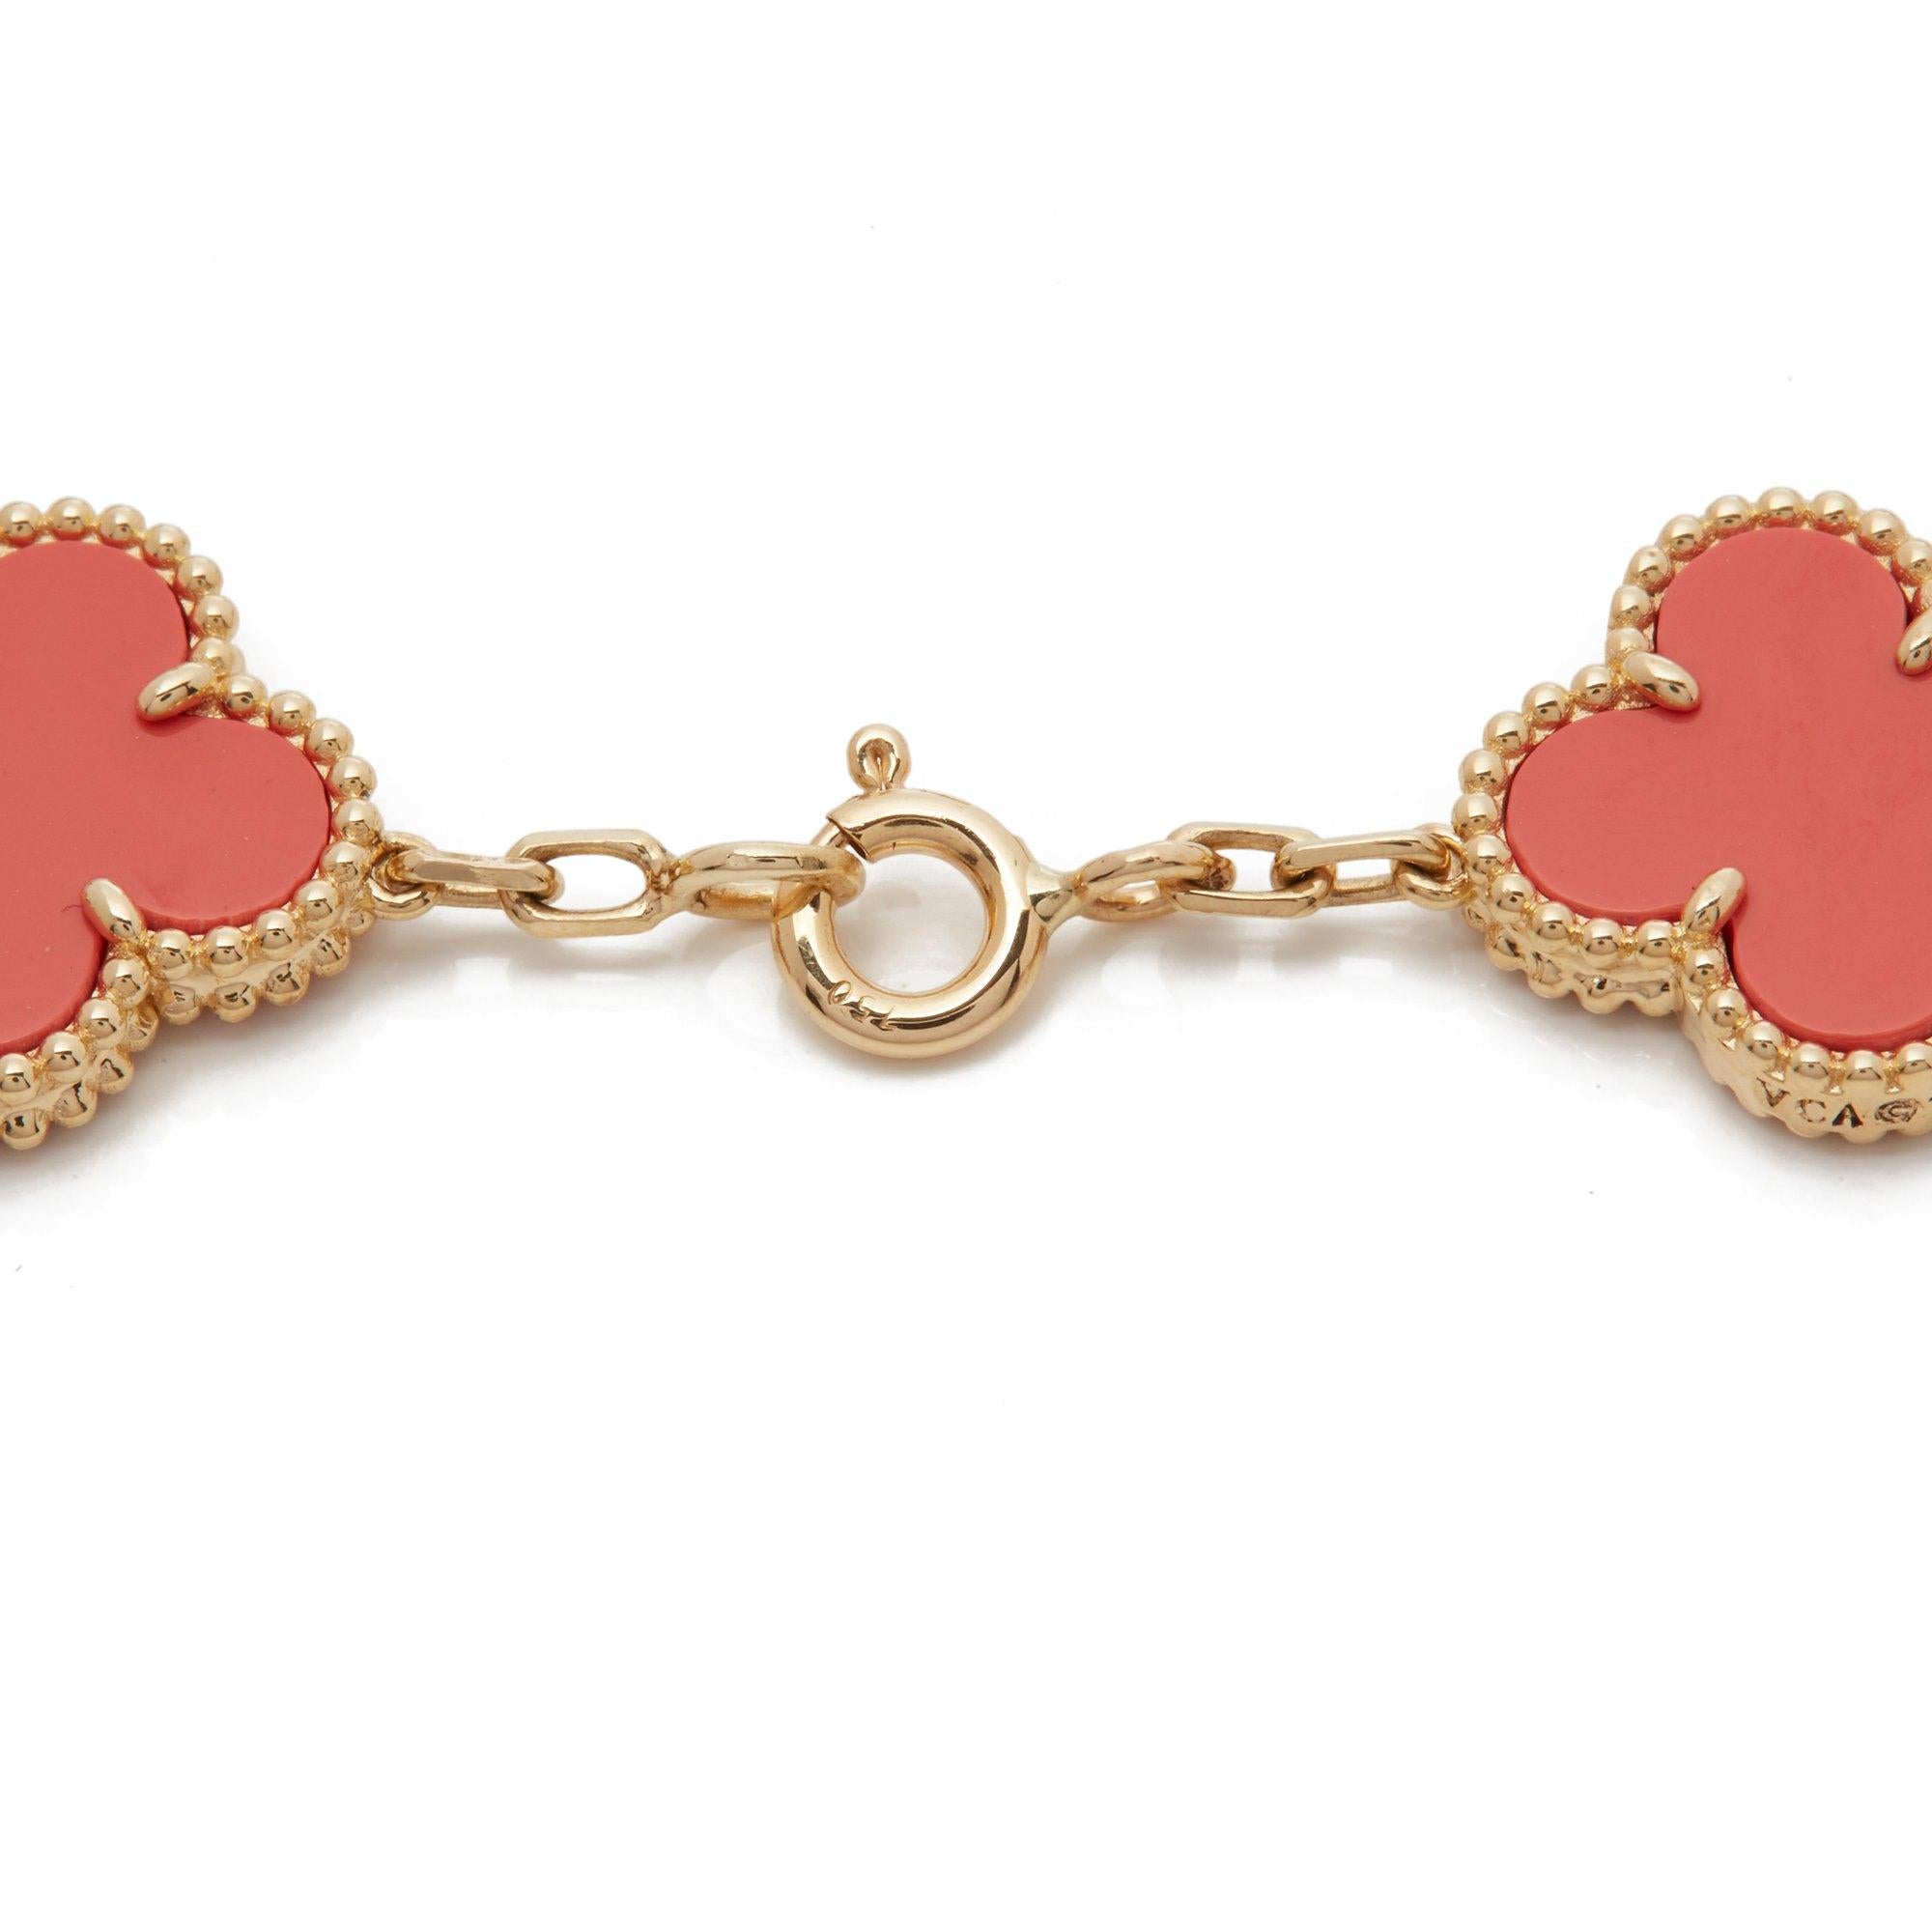 This Bracelet by Van Cleef and Arpels is from their Signature Alhambra collection. Set with Five Clover Motif Pink Coral Sections each measuring 14.94mm in Diameter. Mounted in 18k Yellow Gold. Complete with Valuation Certificate Dated 04.02.2008